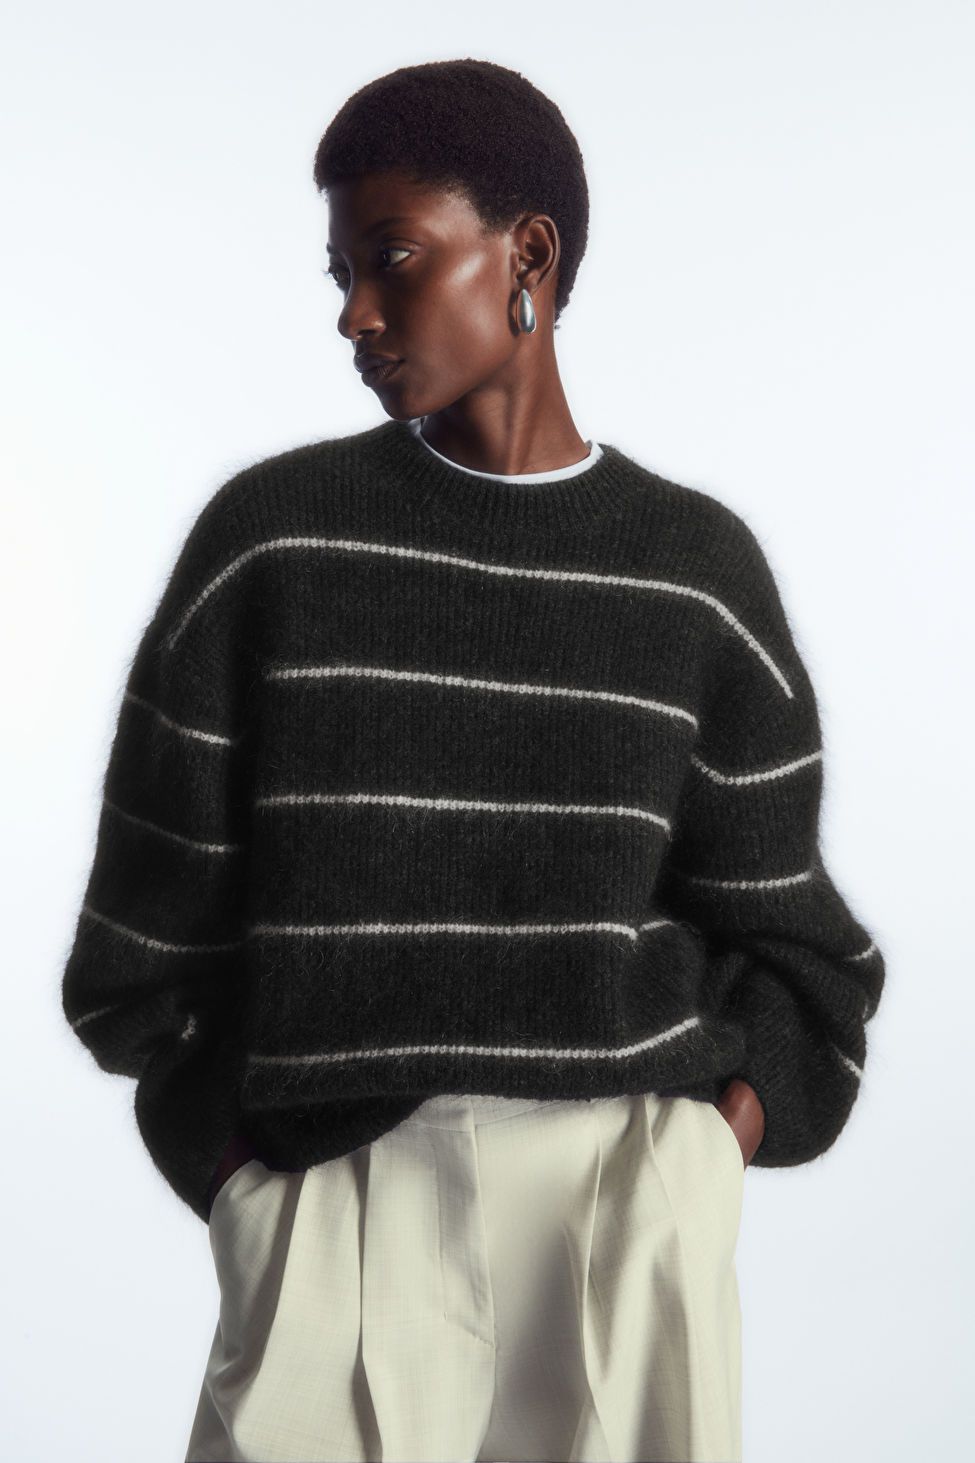 TEXTURED MOHAIR-BLEND SWEATER - DARK GRAY / STRIPED - Knitwear - COS | COS (US)